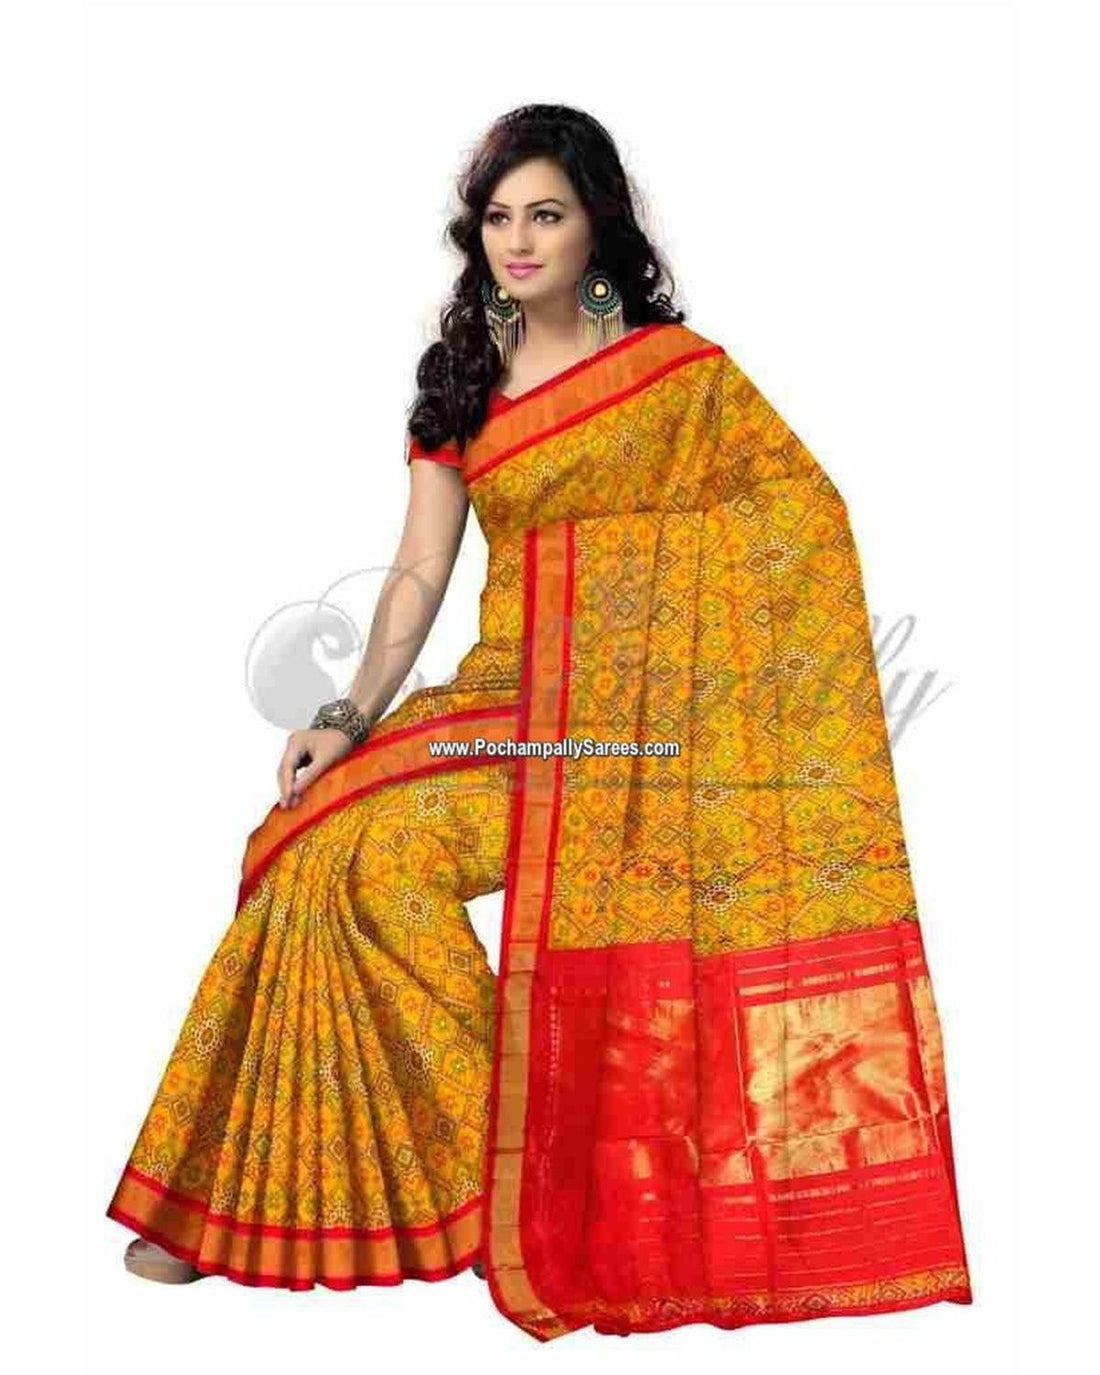 RED AND MUSTARD YELLOW IKKAT SAREE WITH CONTEMPORARY PATTERNS - pochampallysarees.com